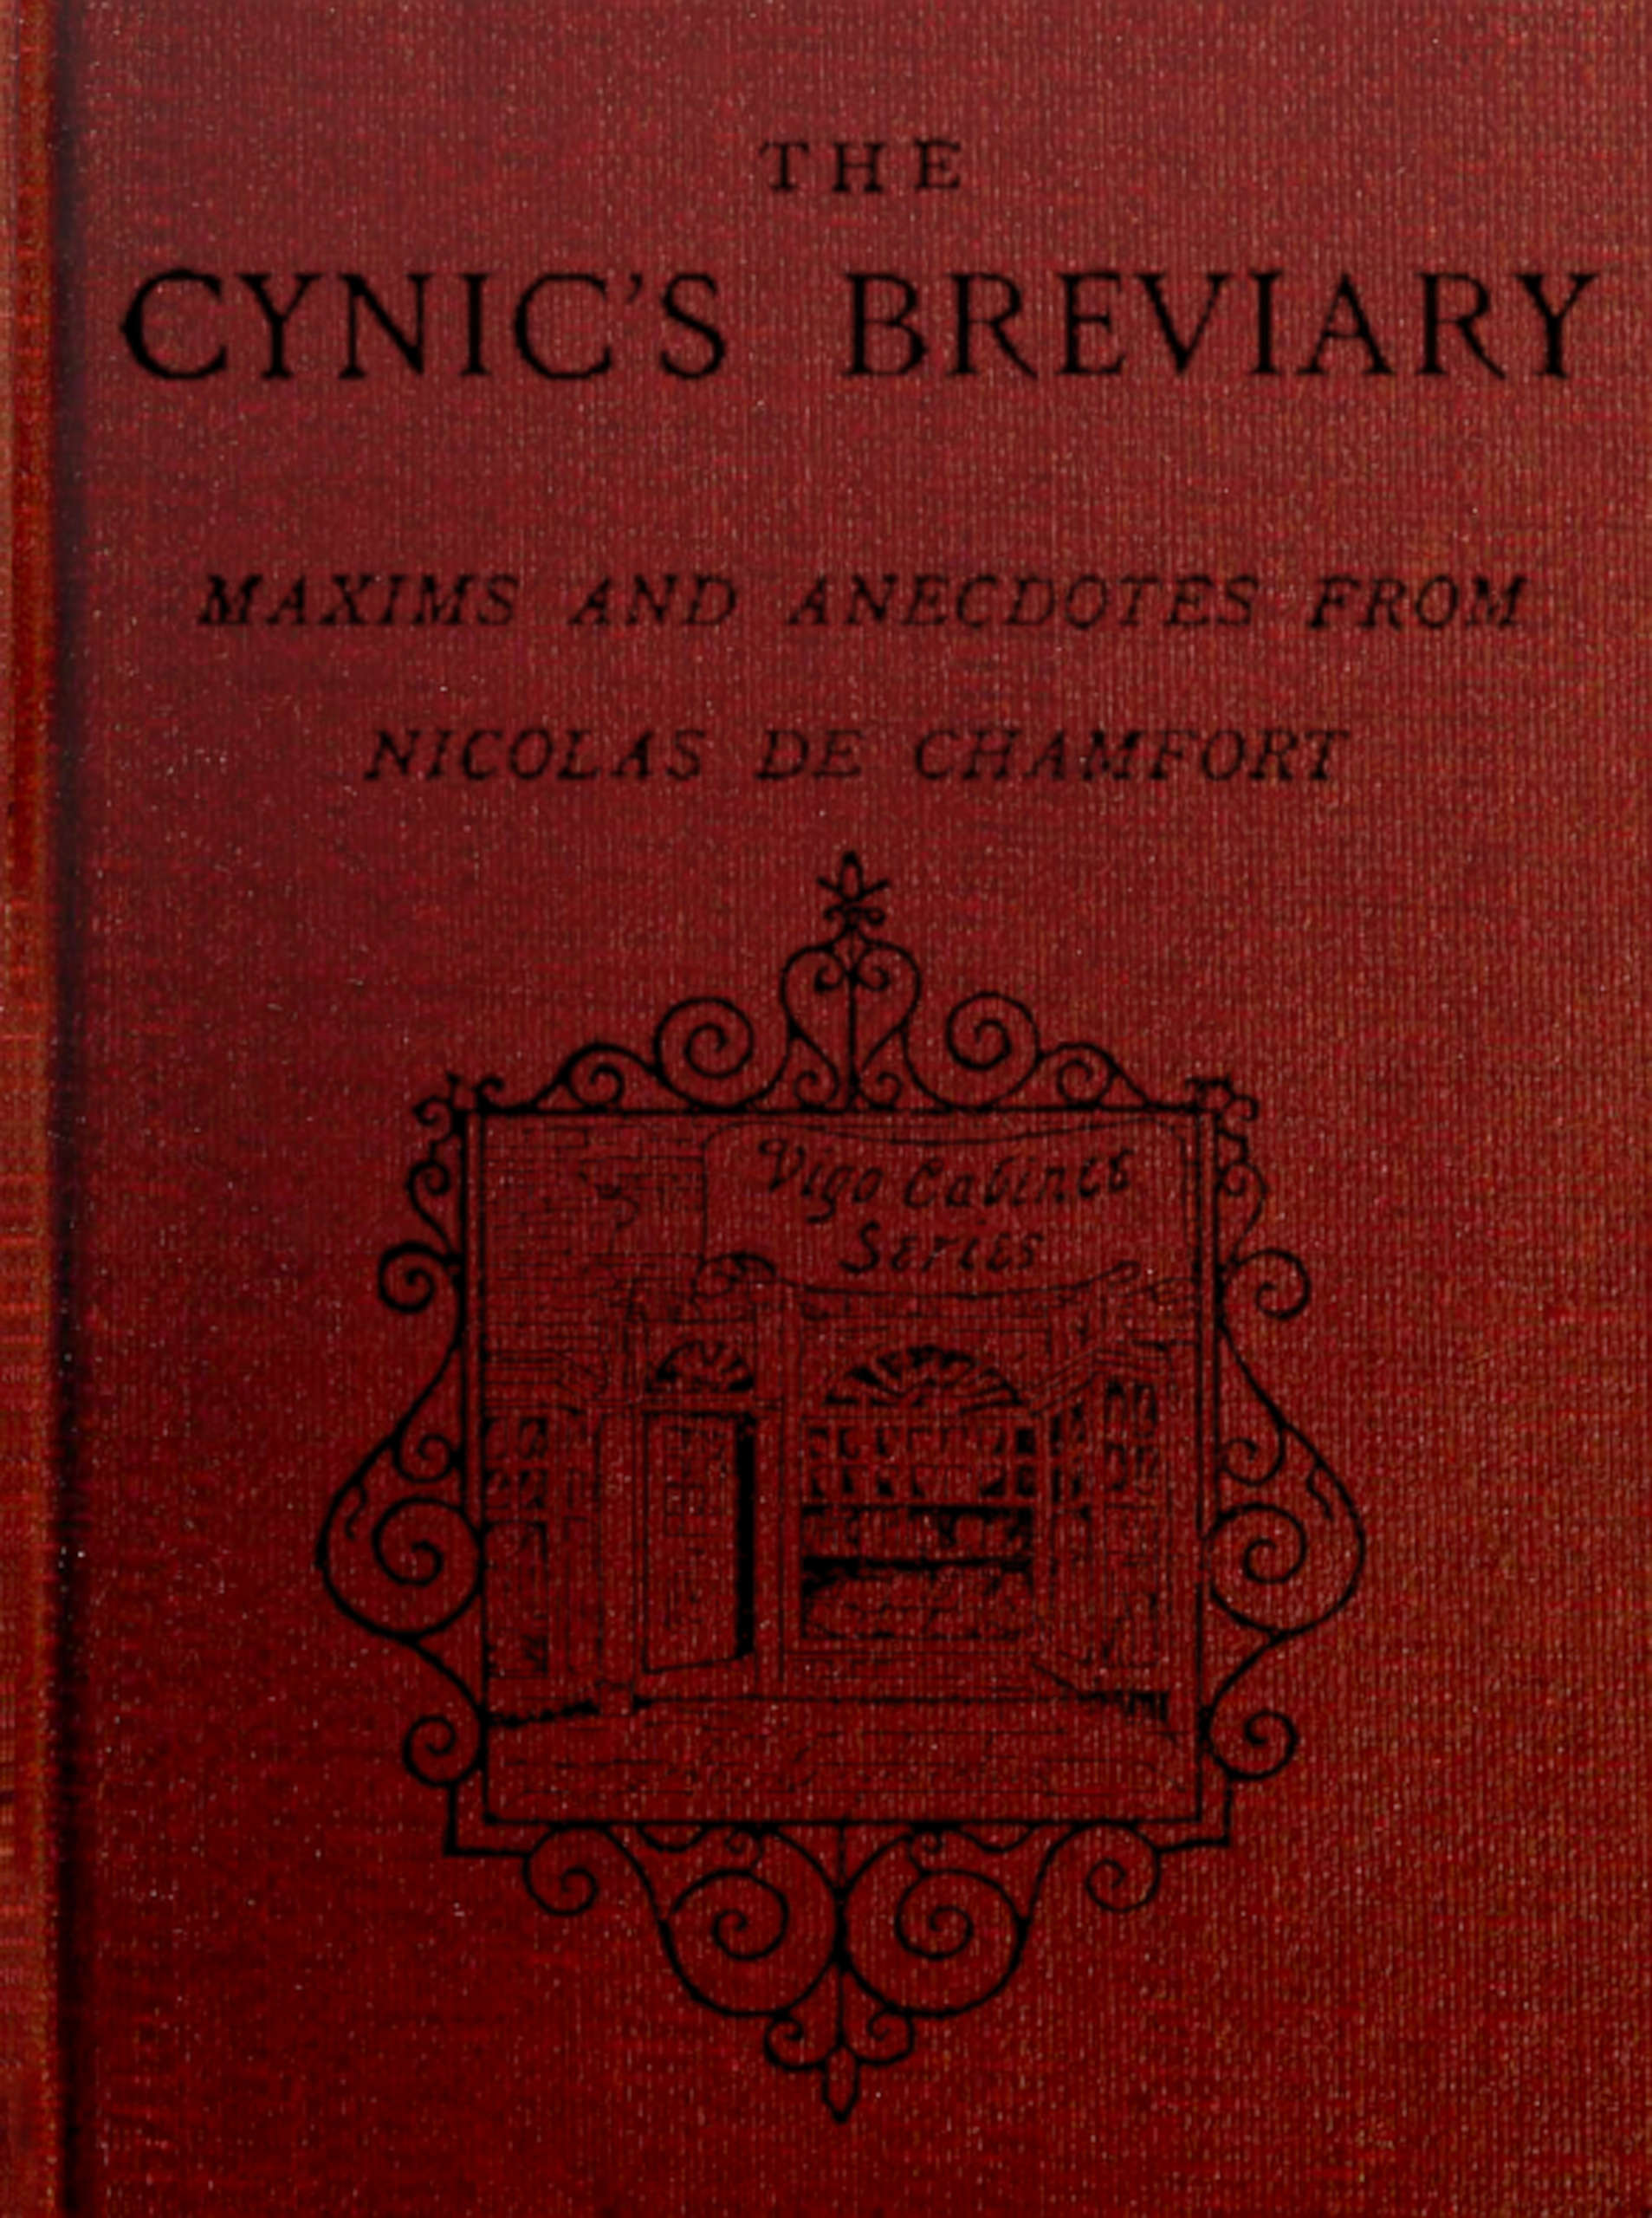 The cynic's breviary: Maxims and anecdotes from Nicolas de Chamfort